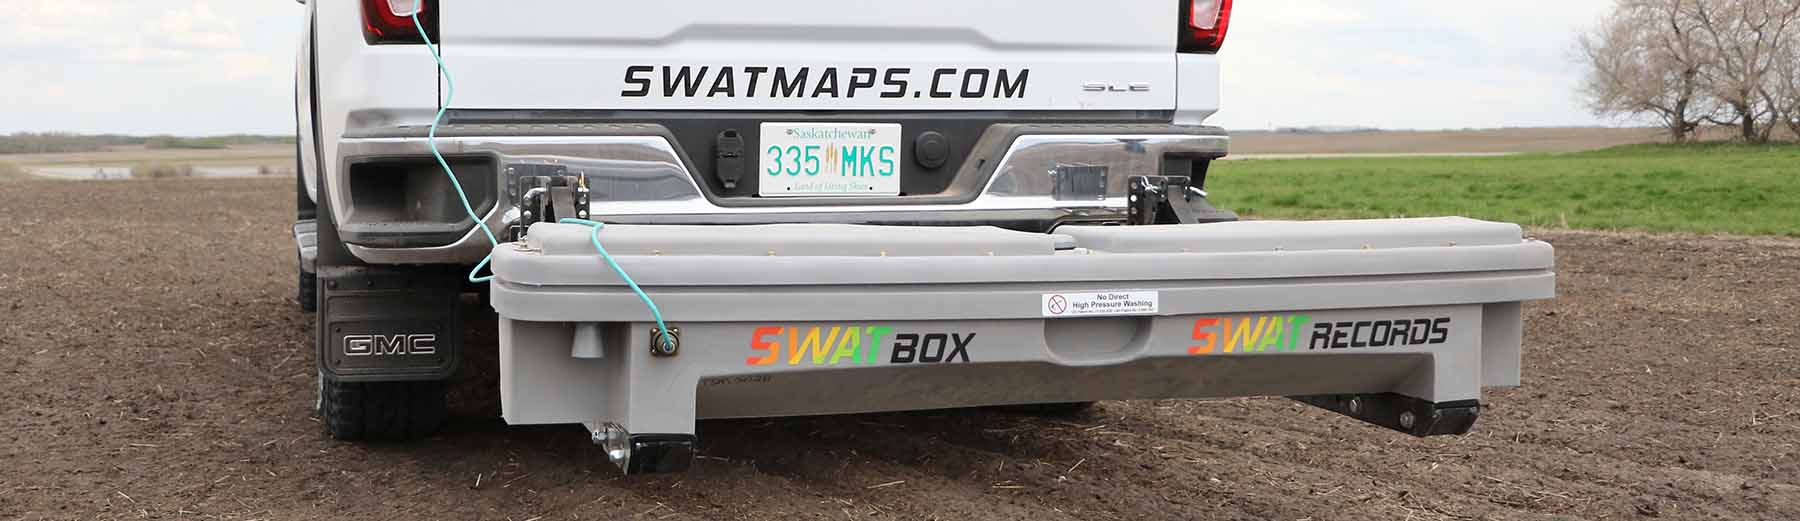 Image of a SWAT BOX mounted on the rear of a SWAT SUPER TRUCK